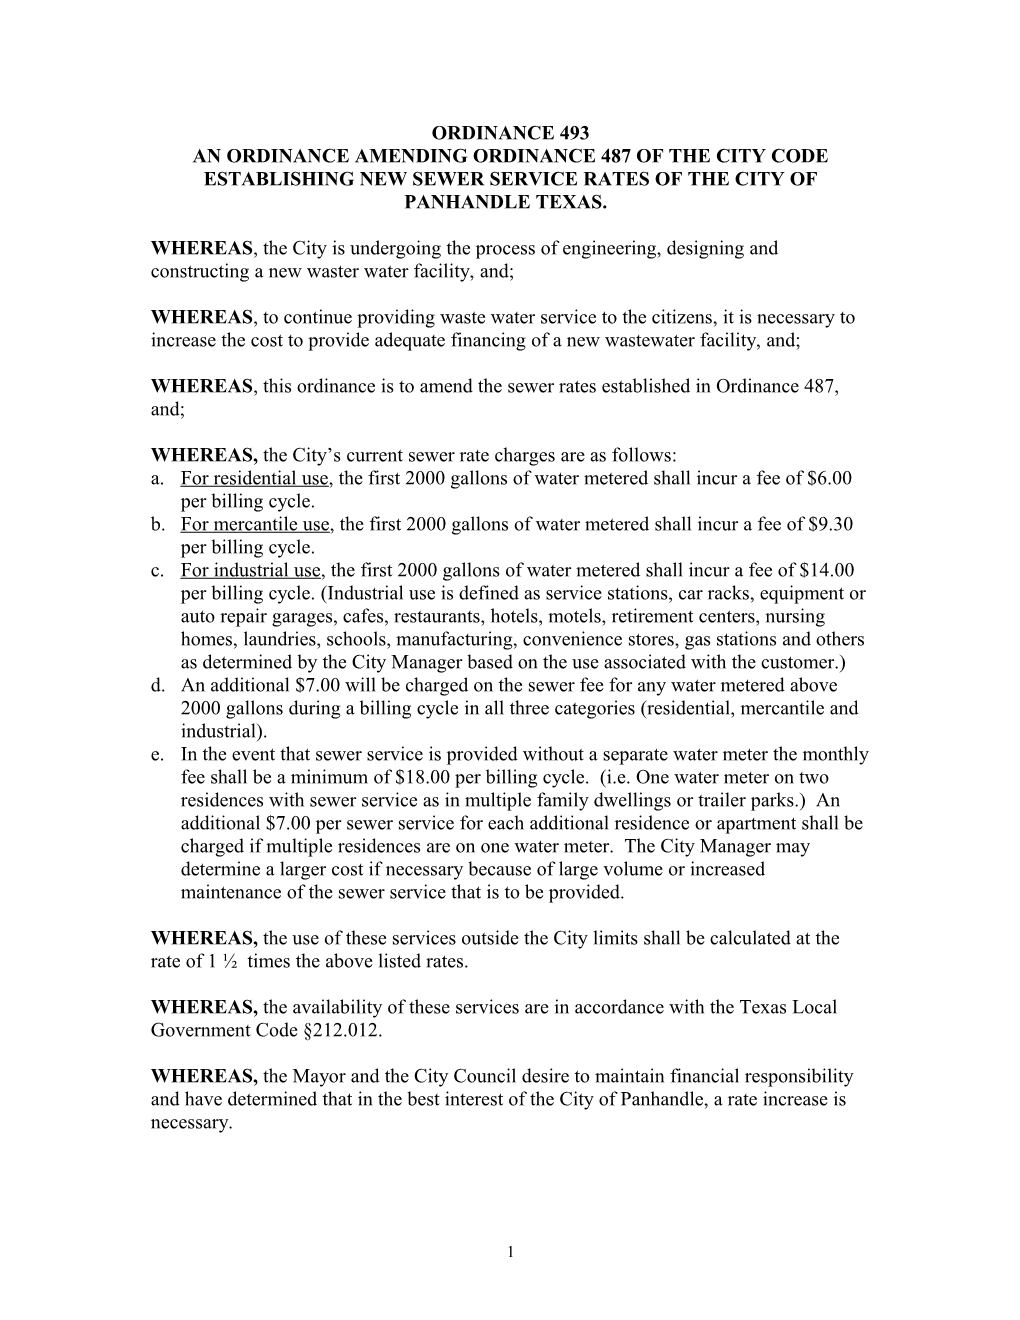 An Ordinance Amending Ordinance 487 of the City Code Establishing New Sewer Service Rates